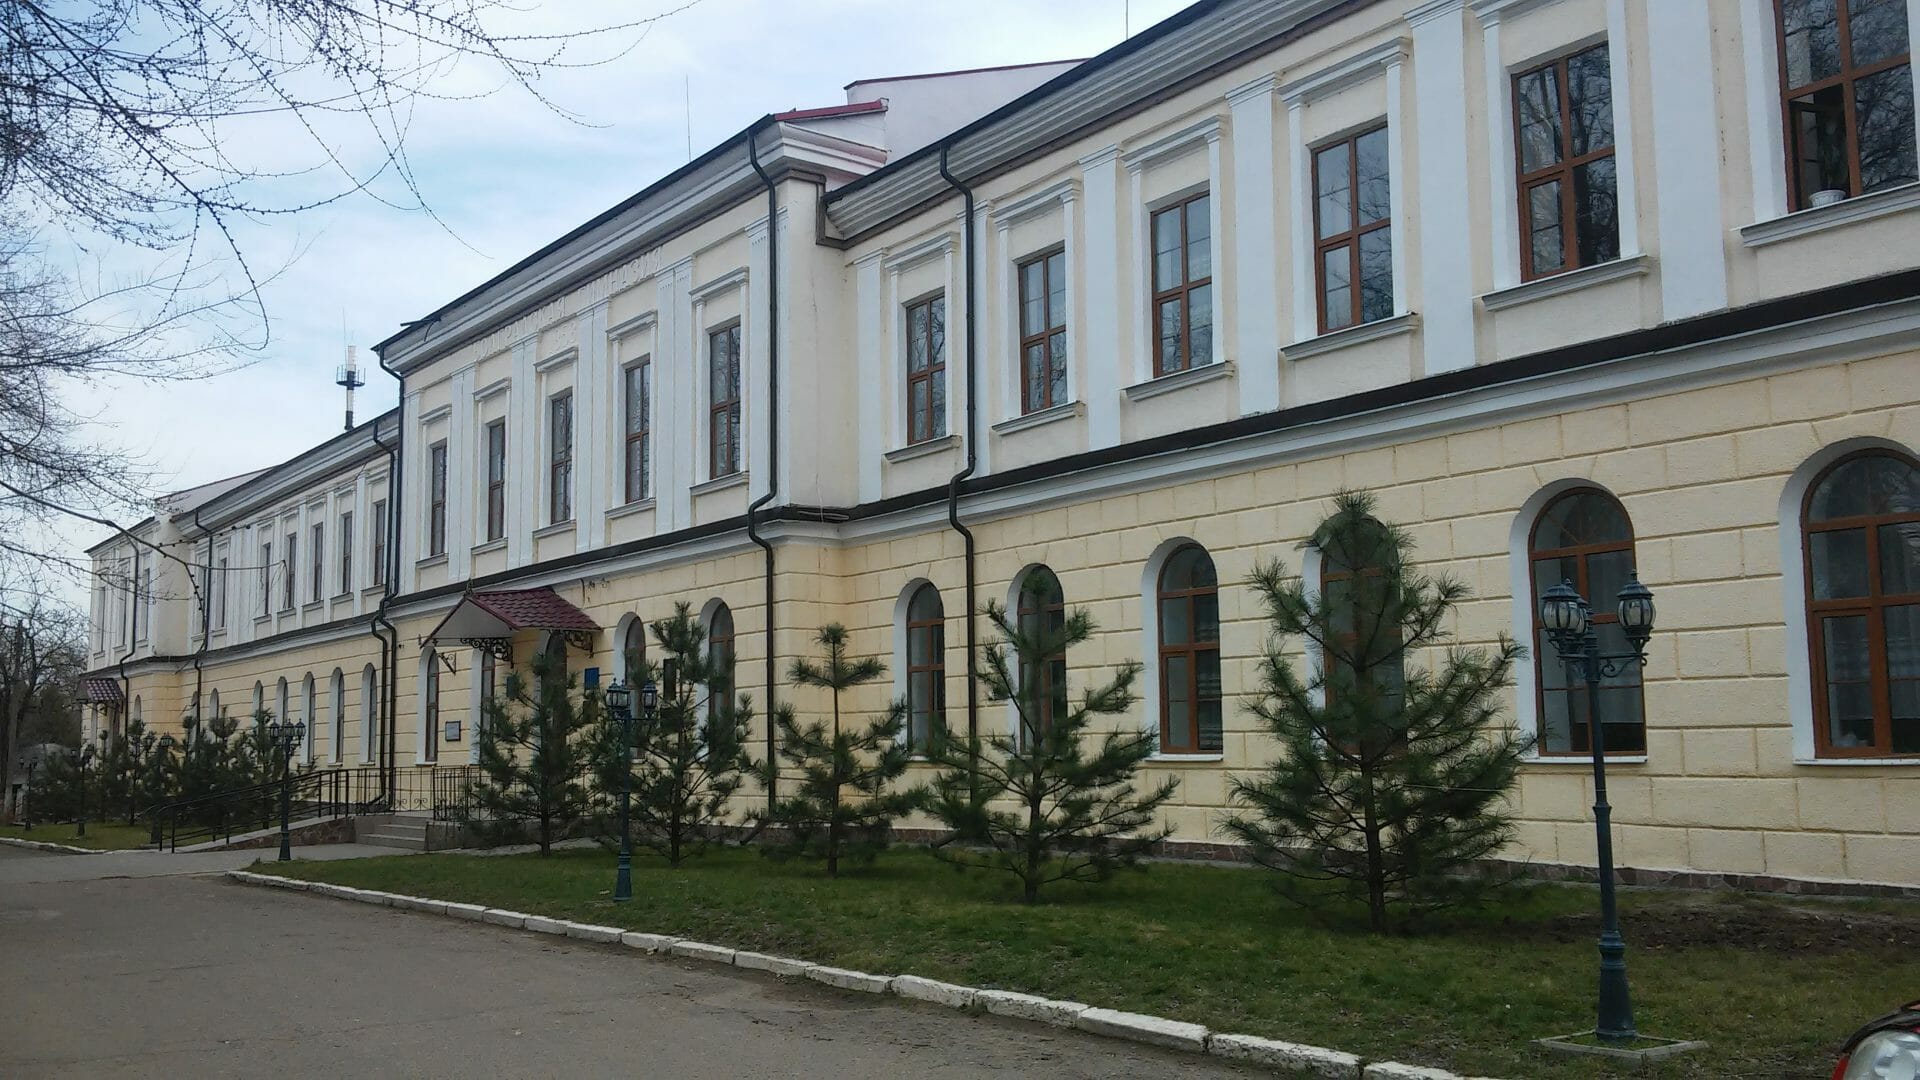  Investment Sector of the Bolgrad Town Council